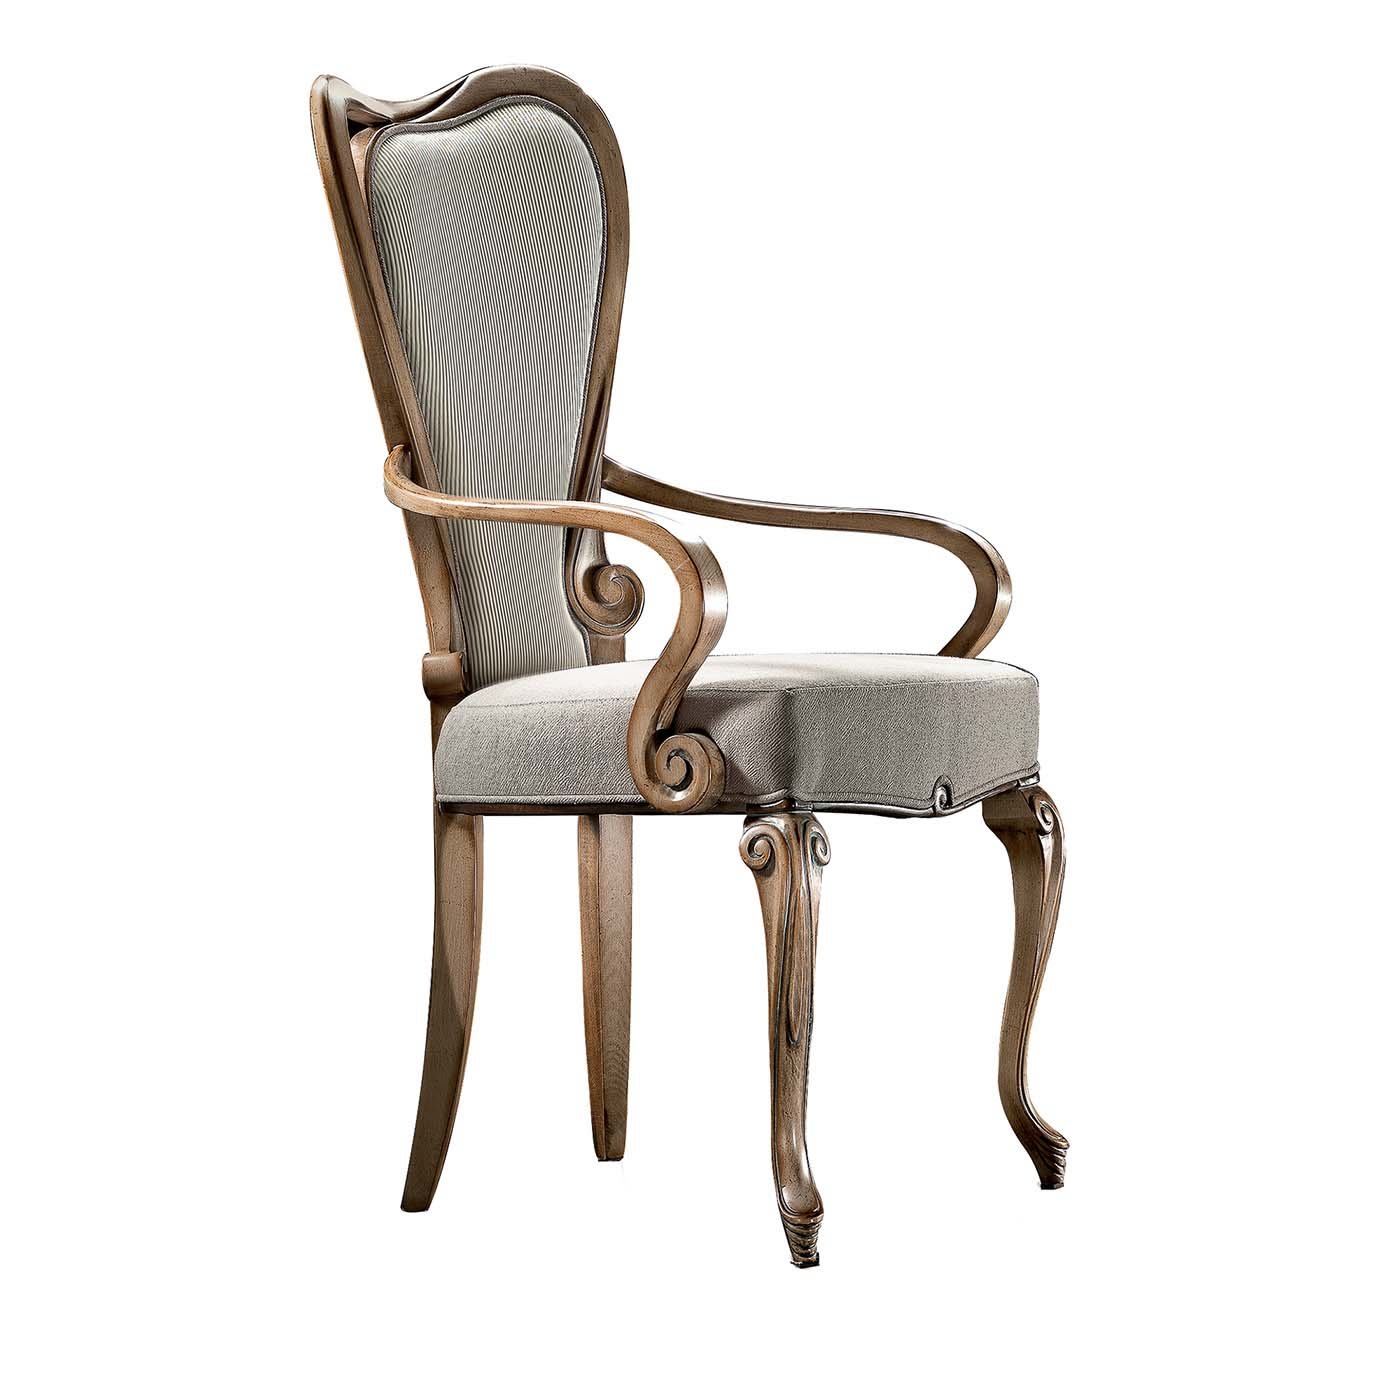 Dining Chair with Armrests #6 - Modenese Gastone